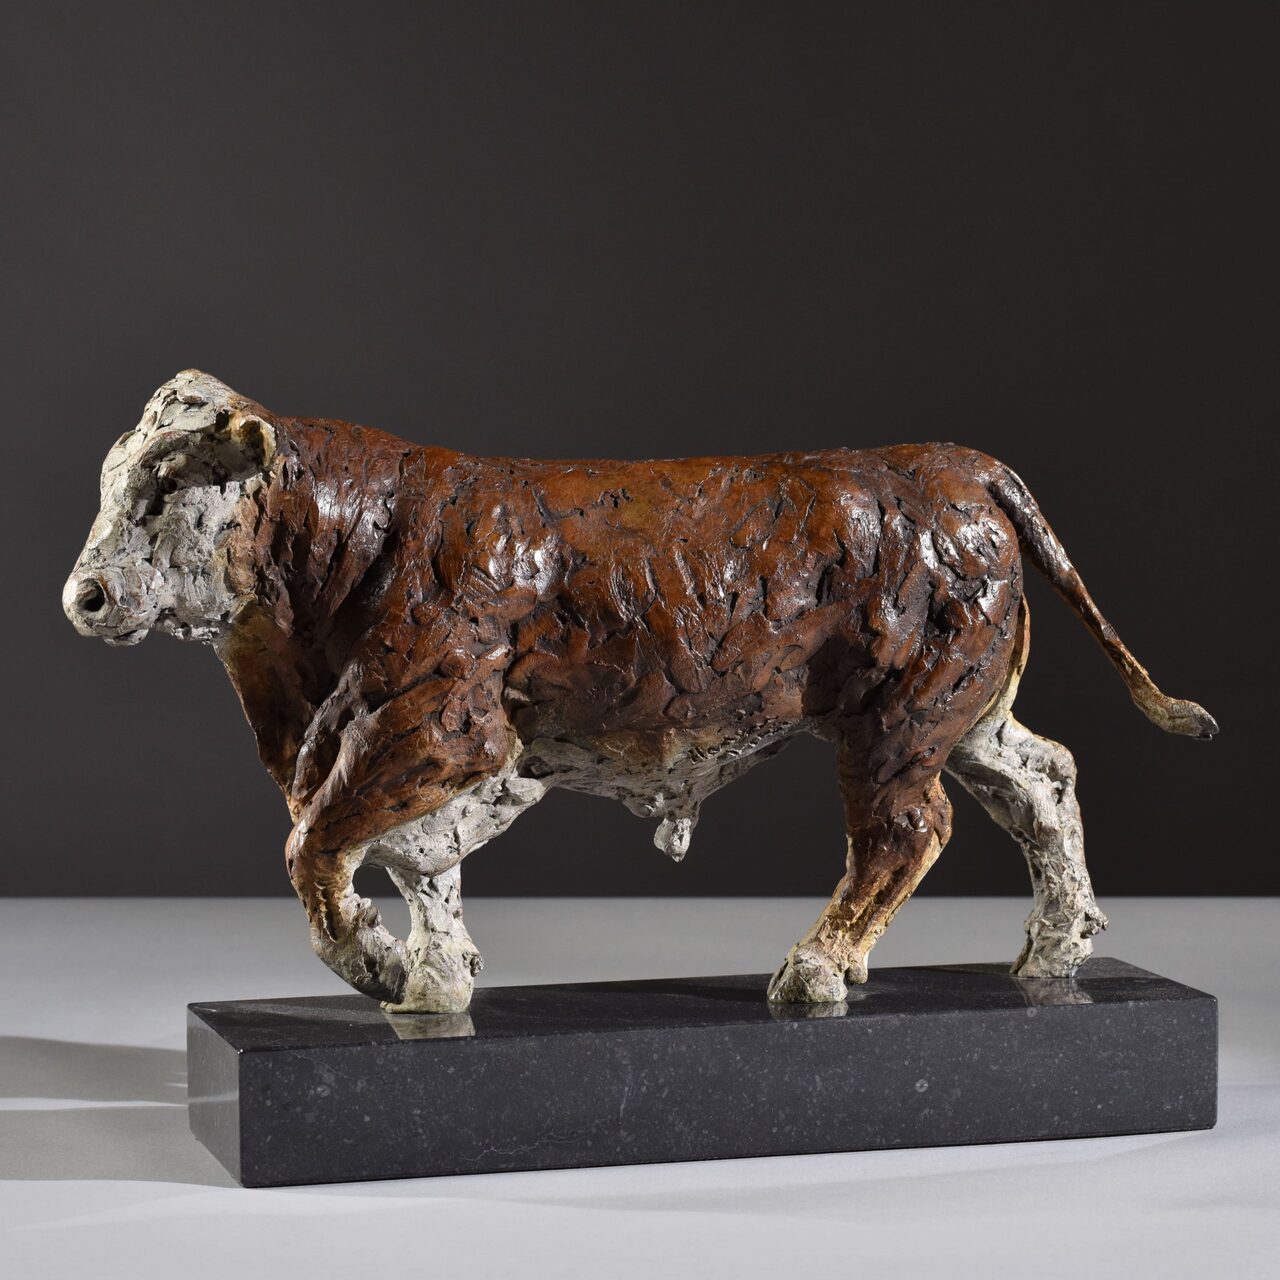 Bull sculpture by Hamish Mackie